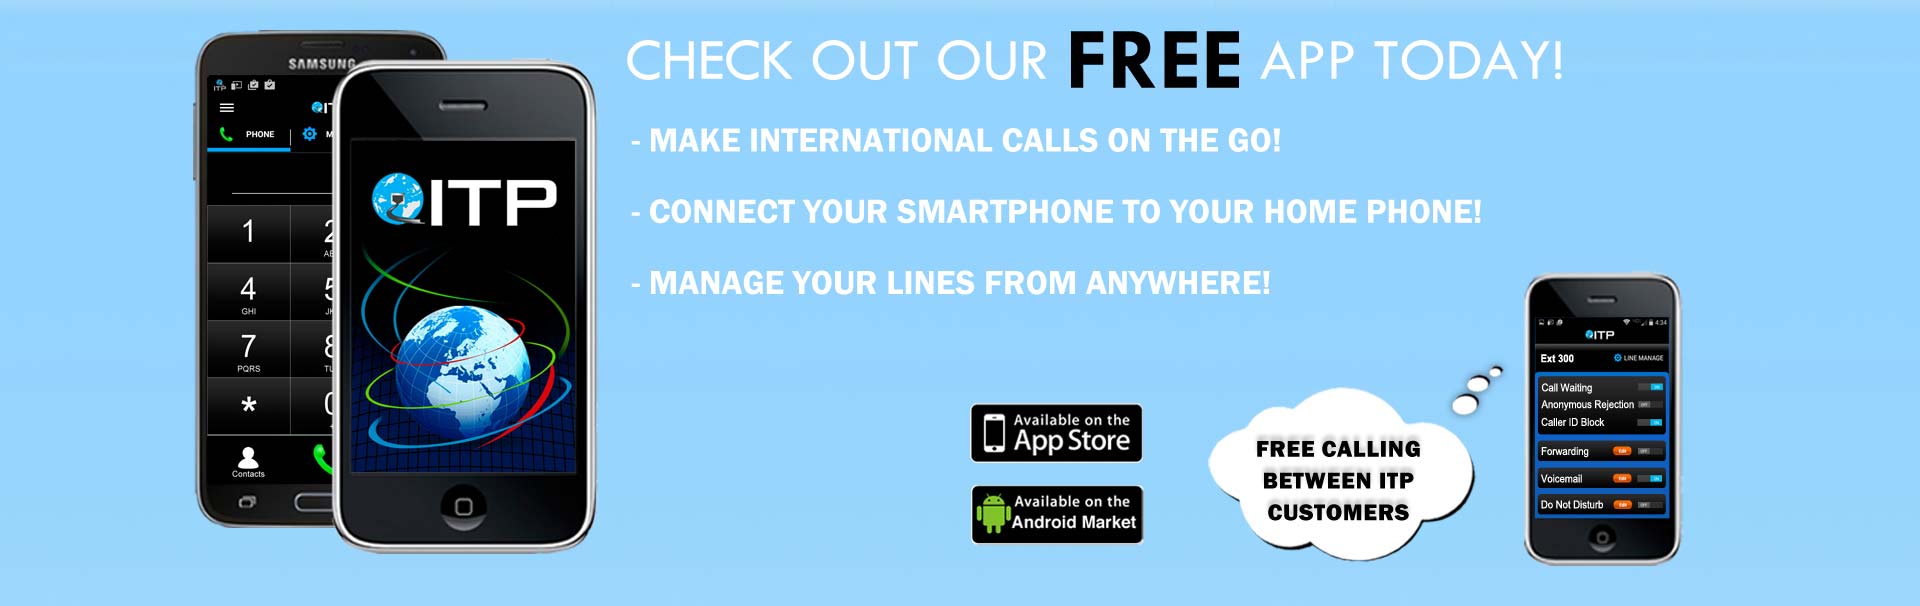 check out our free voip app